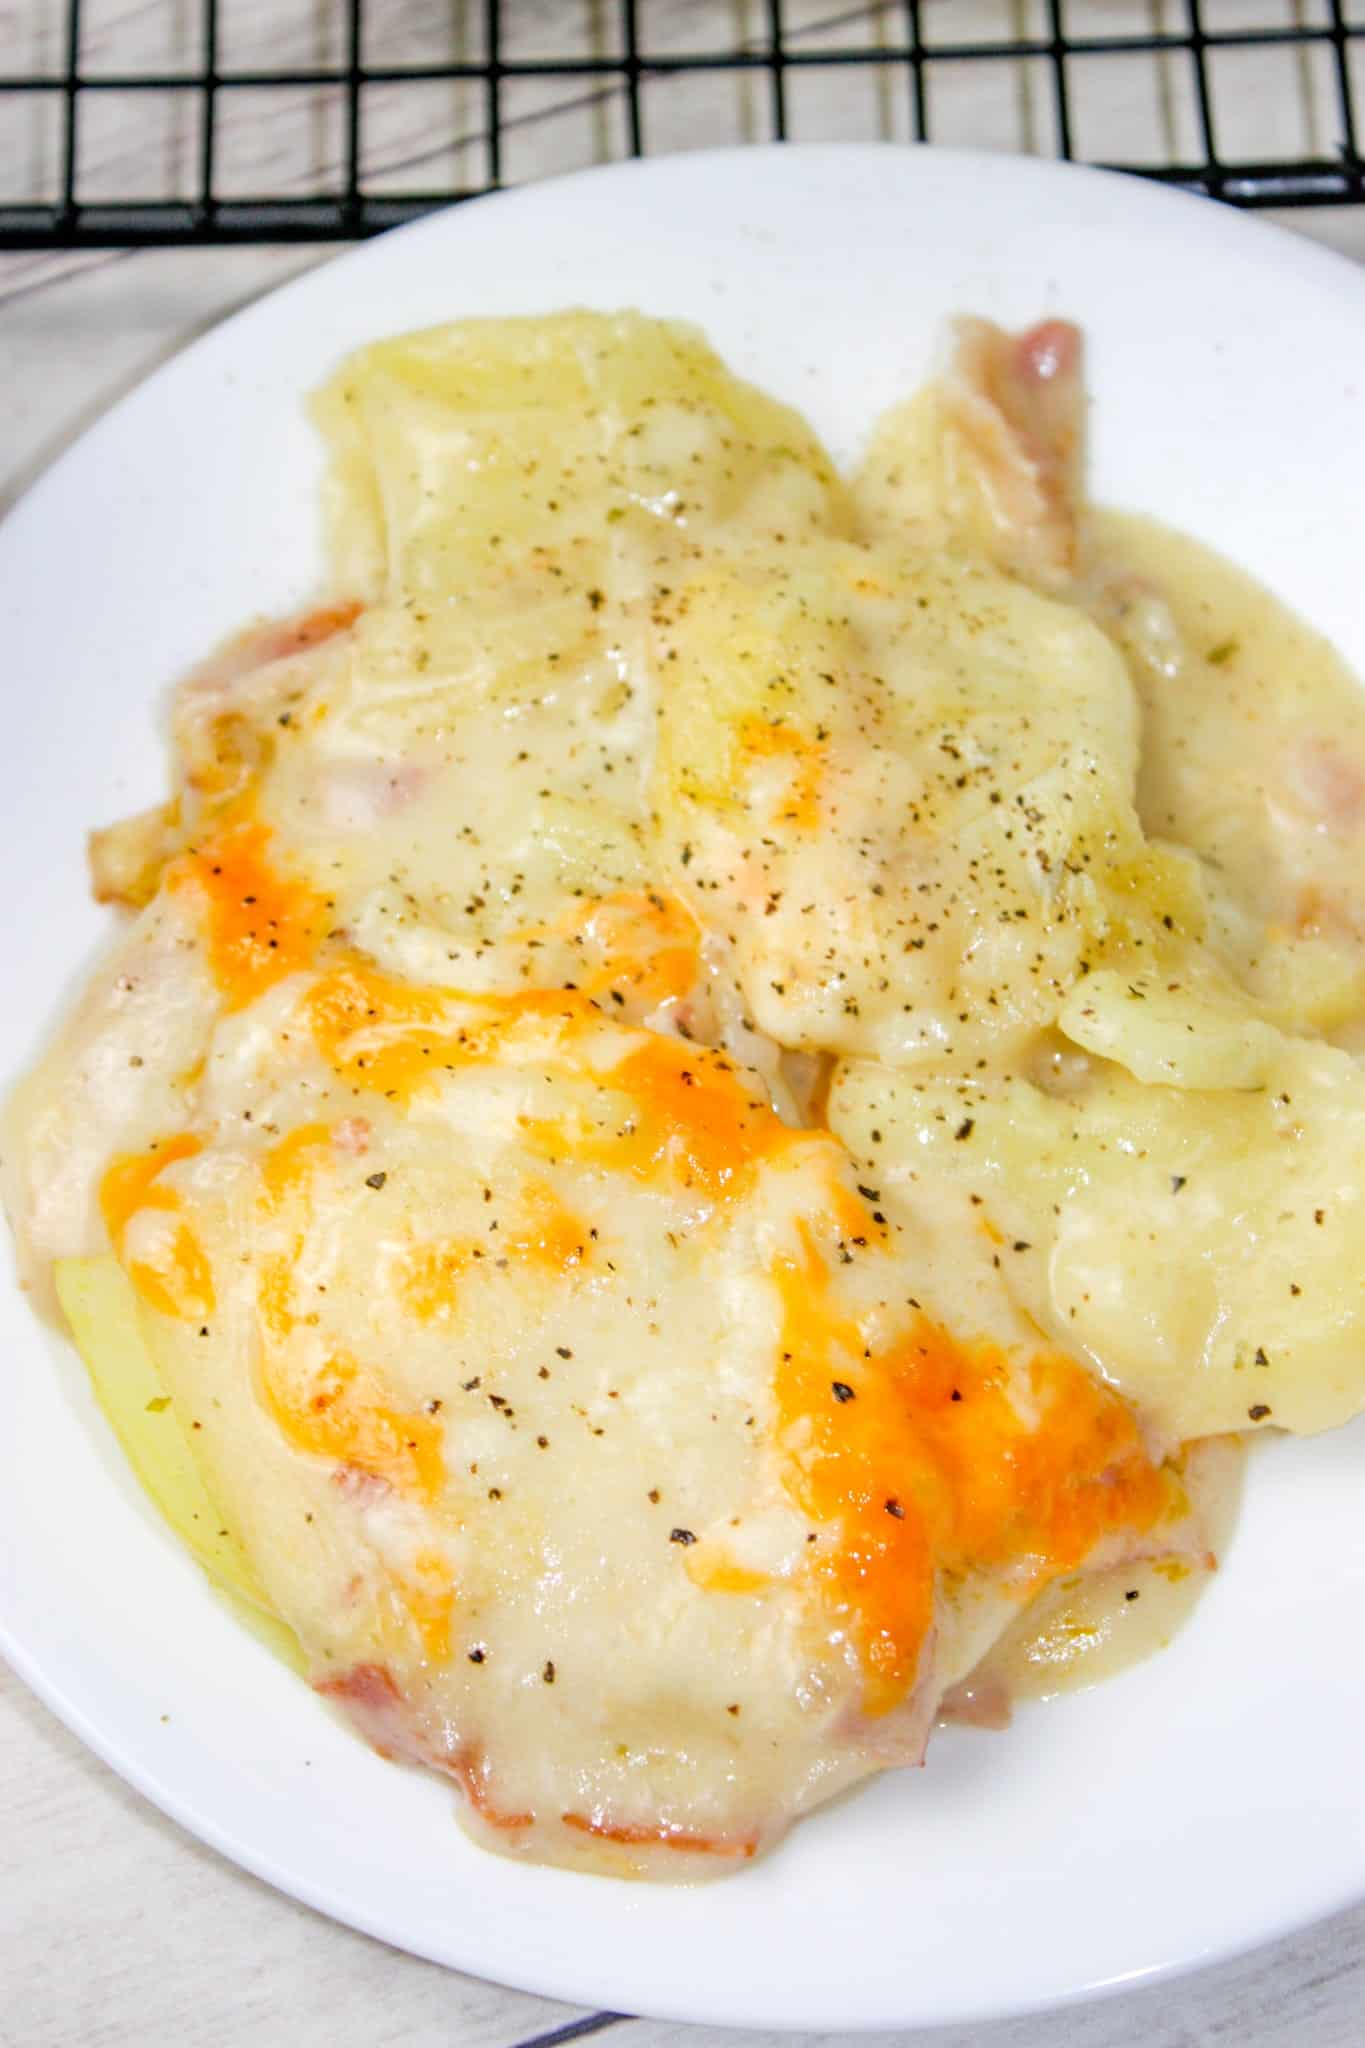 Cooking Scalloped Potatoes in the Instant Pot is a real time saver for this comfort food casserole.  Instant Pot Cheesy Bacon Scalloped Potatoes can be cooked quickly and added as a side dish any day of the week.